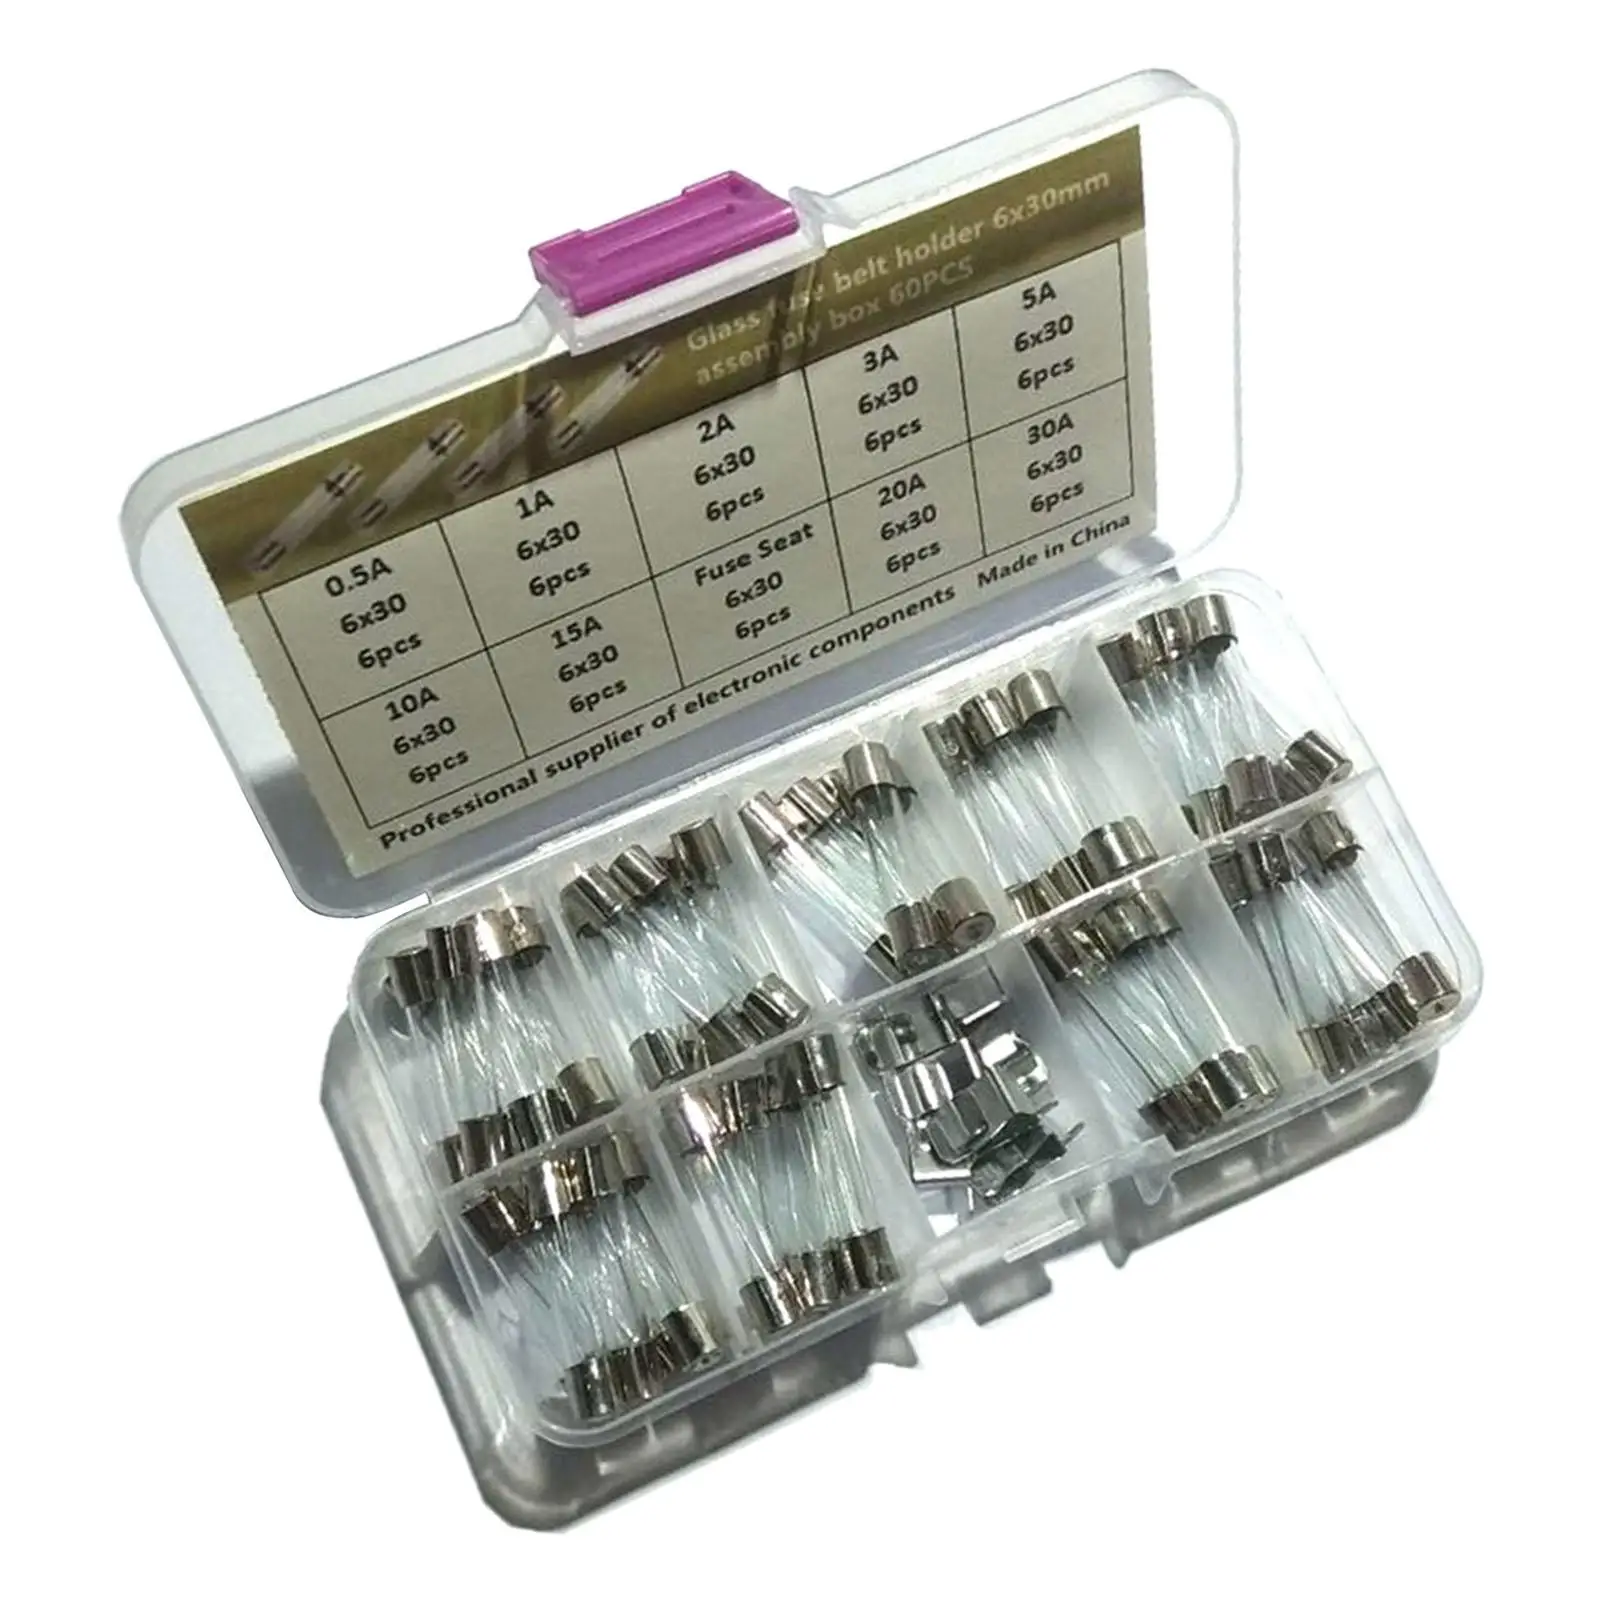 60Pcs Professional Glass Tube Fuses 20A 1A 5A 30A 3A 0.5A Replaces Accessories for Communication Equipment Electronic Industry